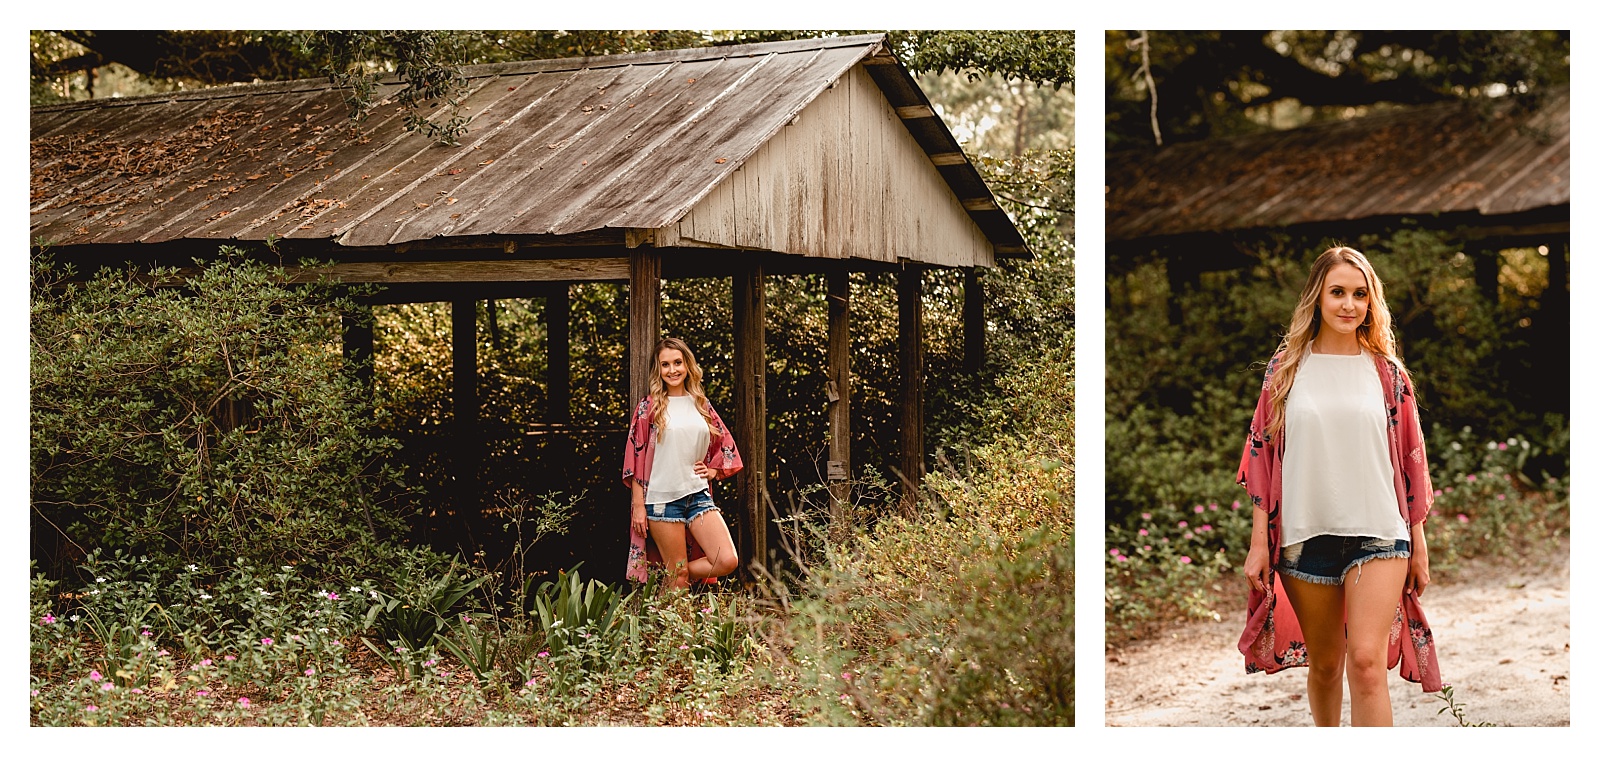 Rustic barn used for high school senior photography. Shelly Williams Photography